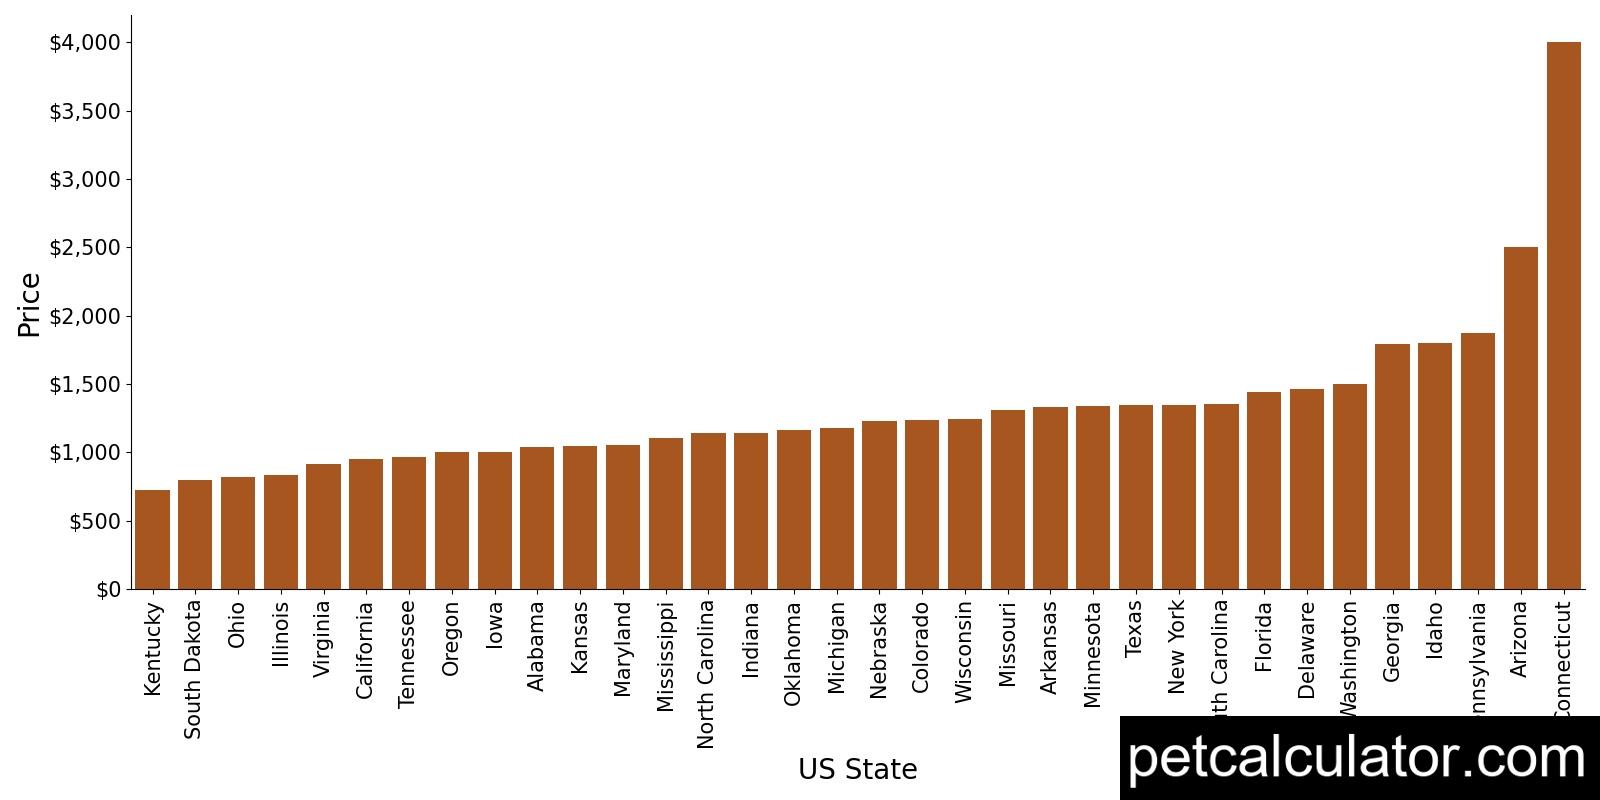 Price of Basset Hound by US State 